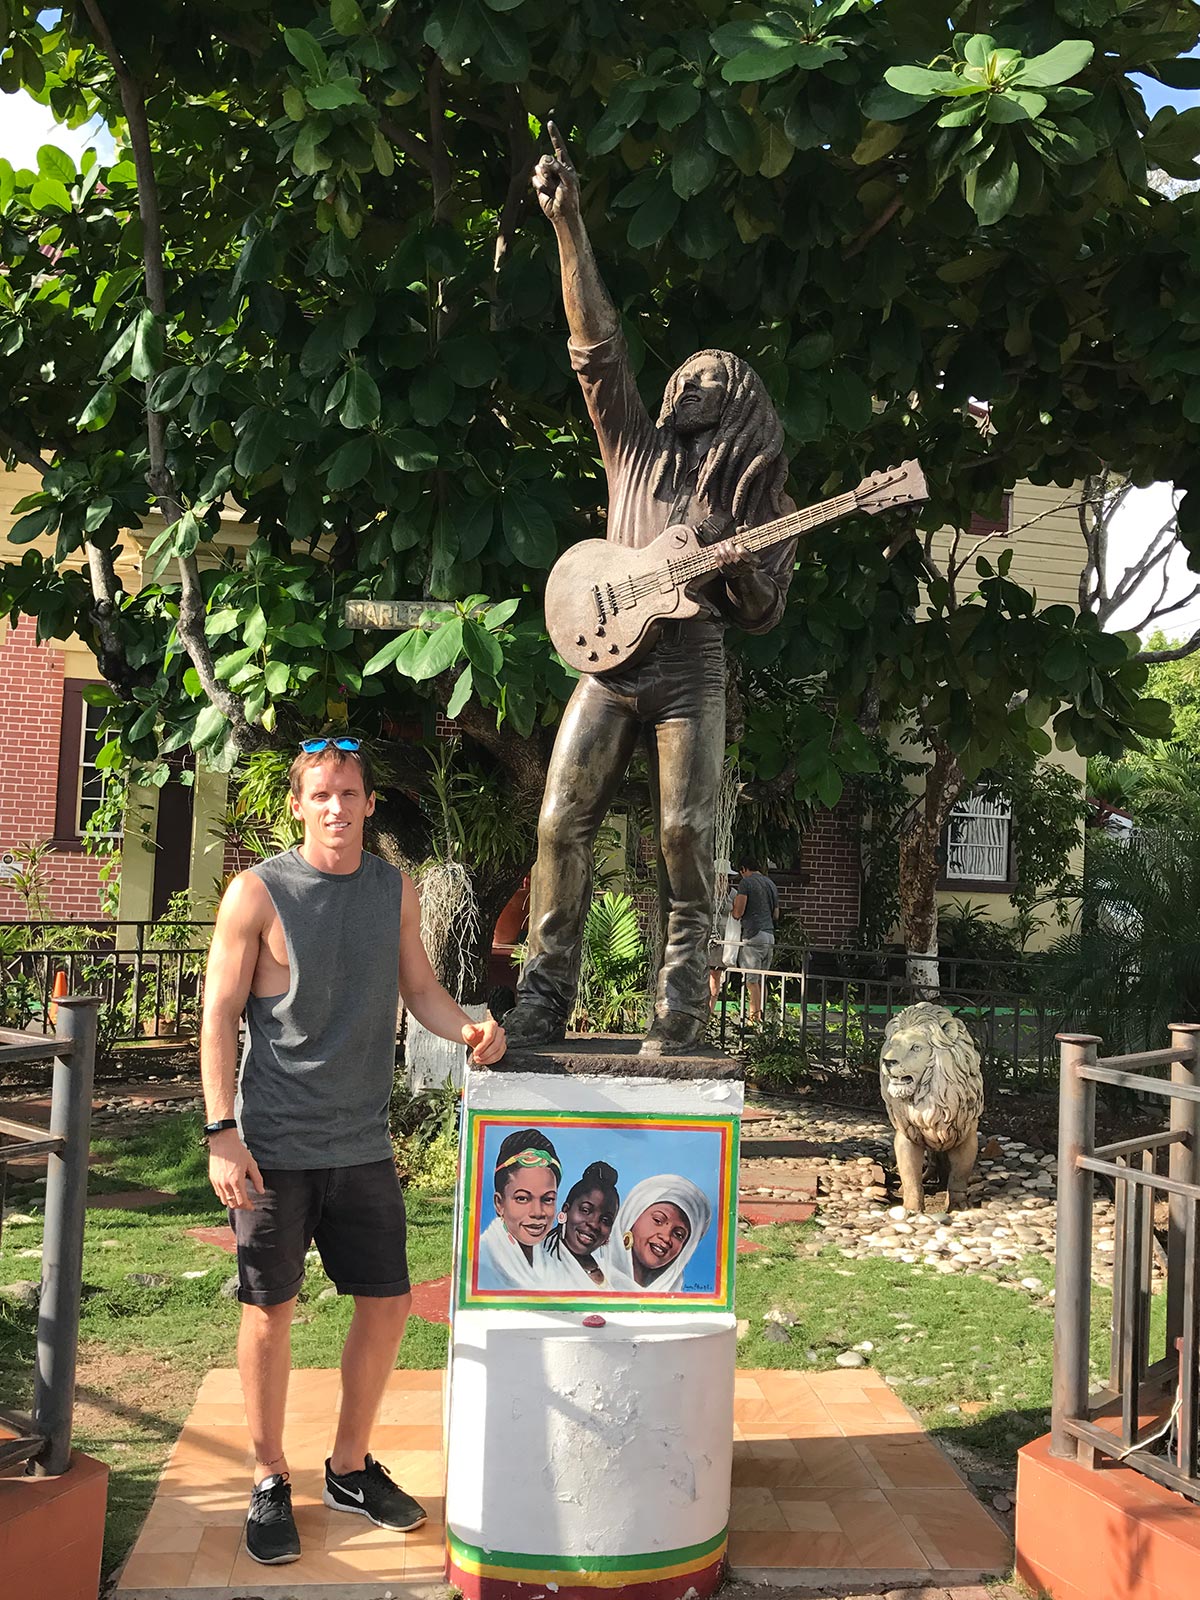 David Simpson with statue of Bob Marley at his house in Negril, Jamaica. Getting chased in Jamaica